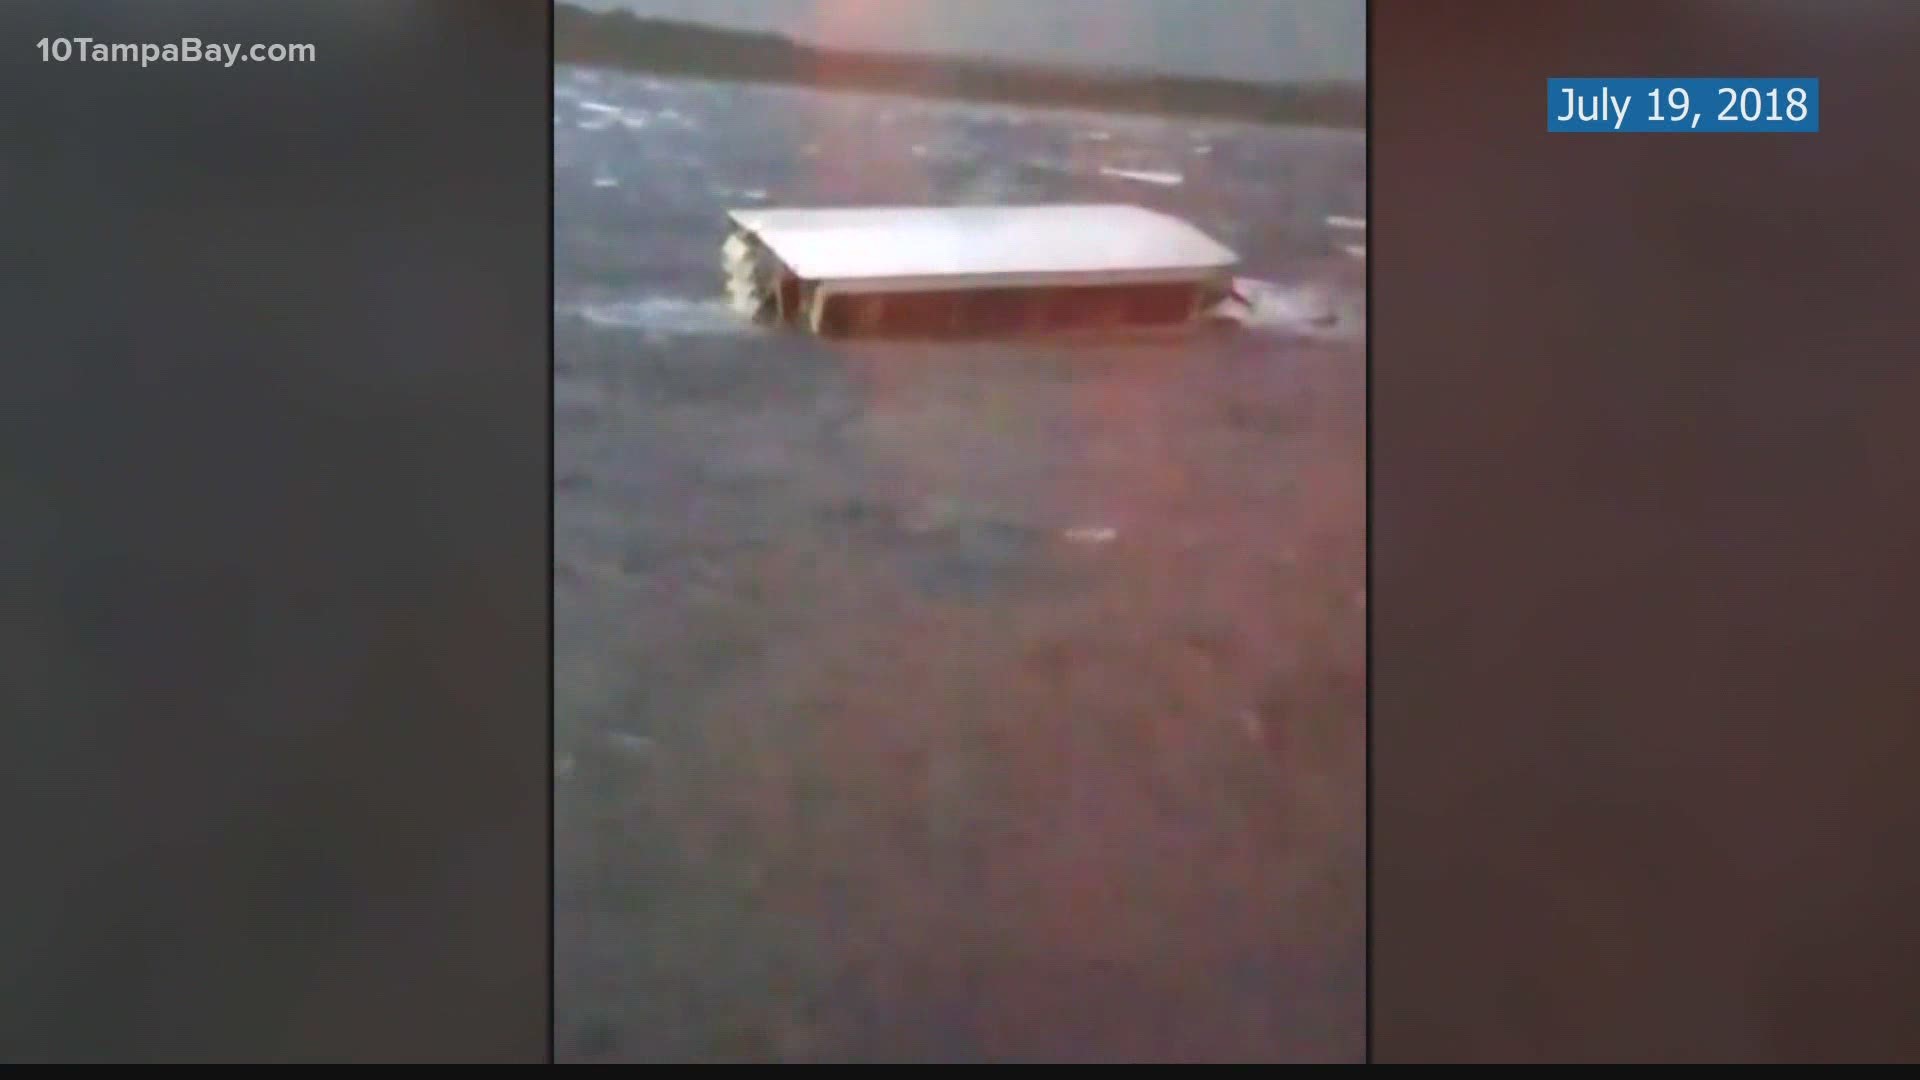 Court records state they were negligent in allowing the boat to go out on the lake during a severe thunderstorm warning.